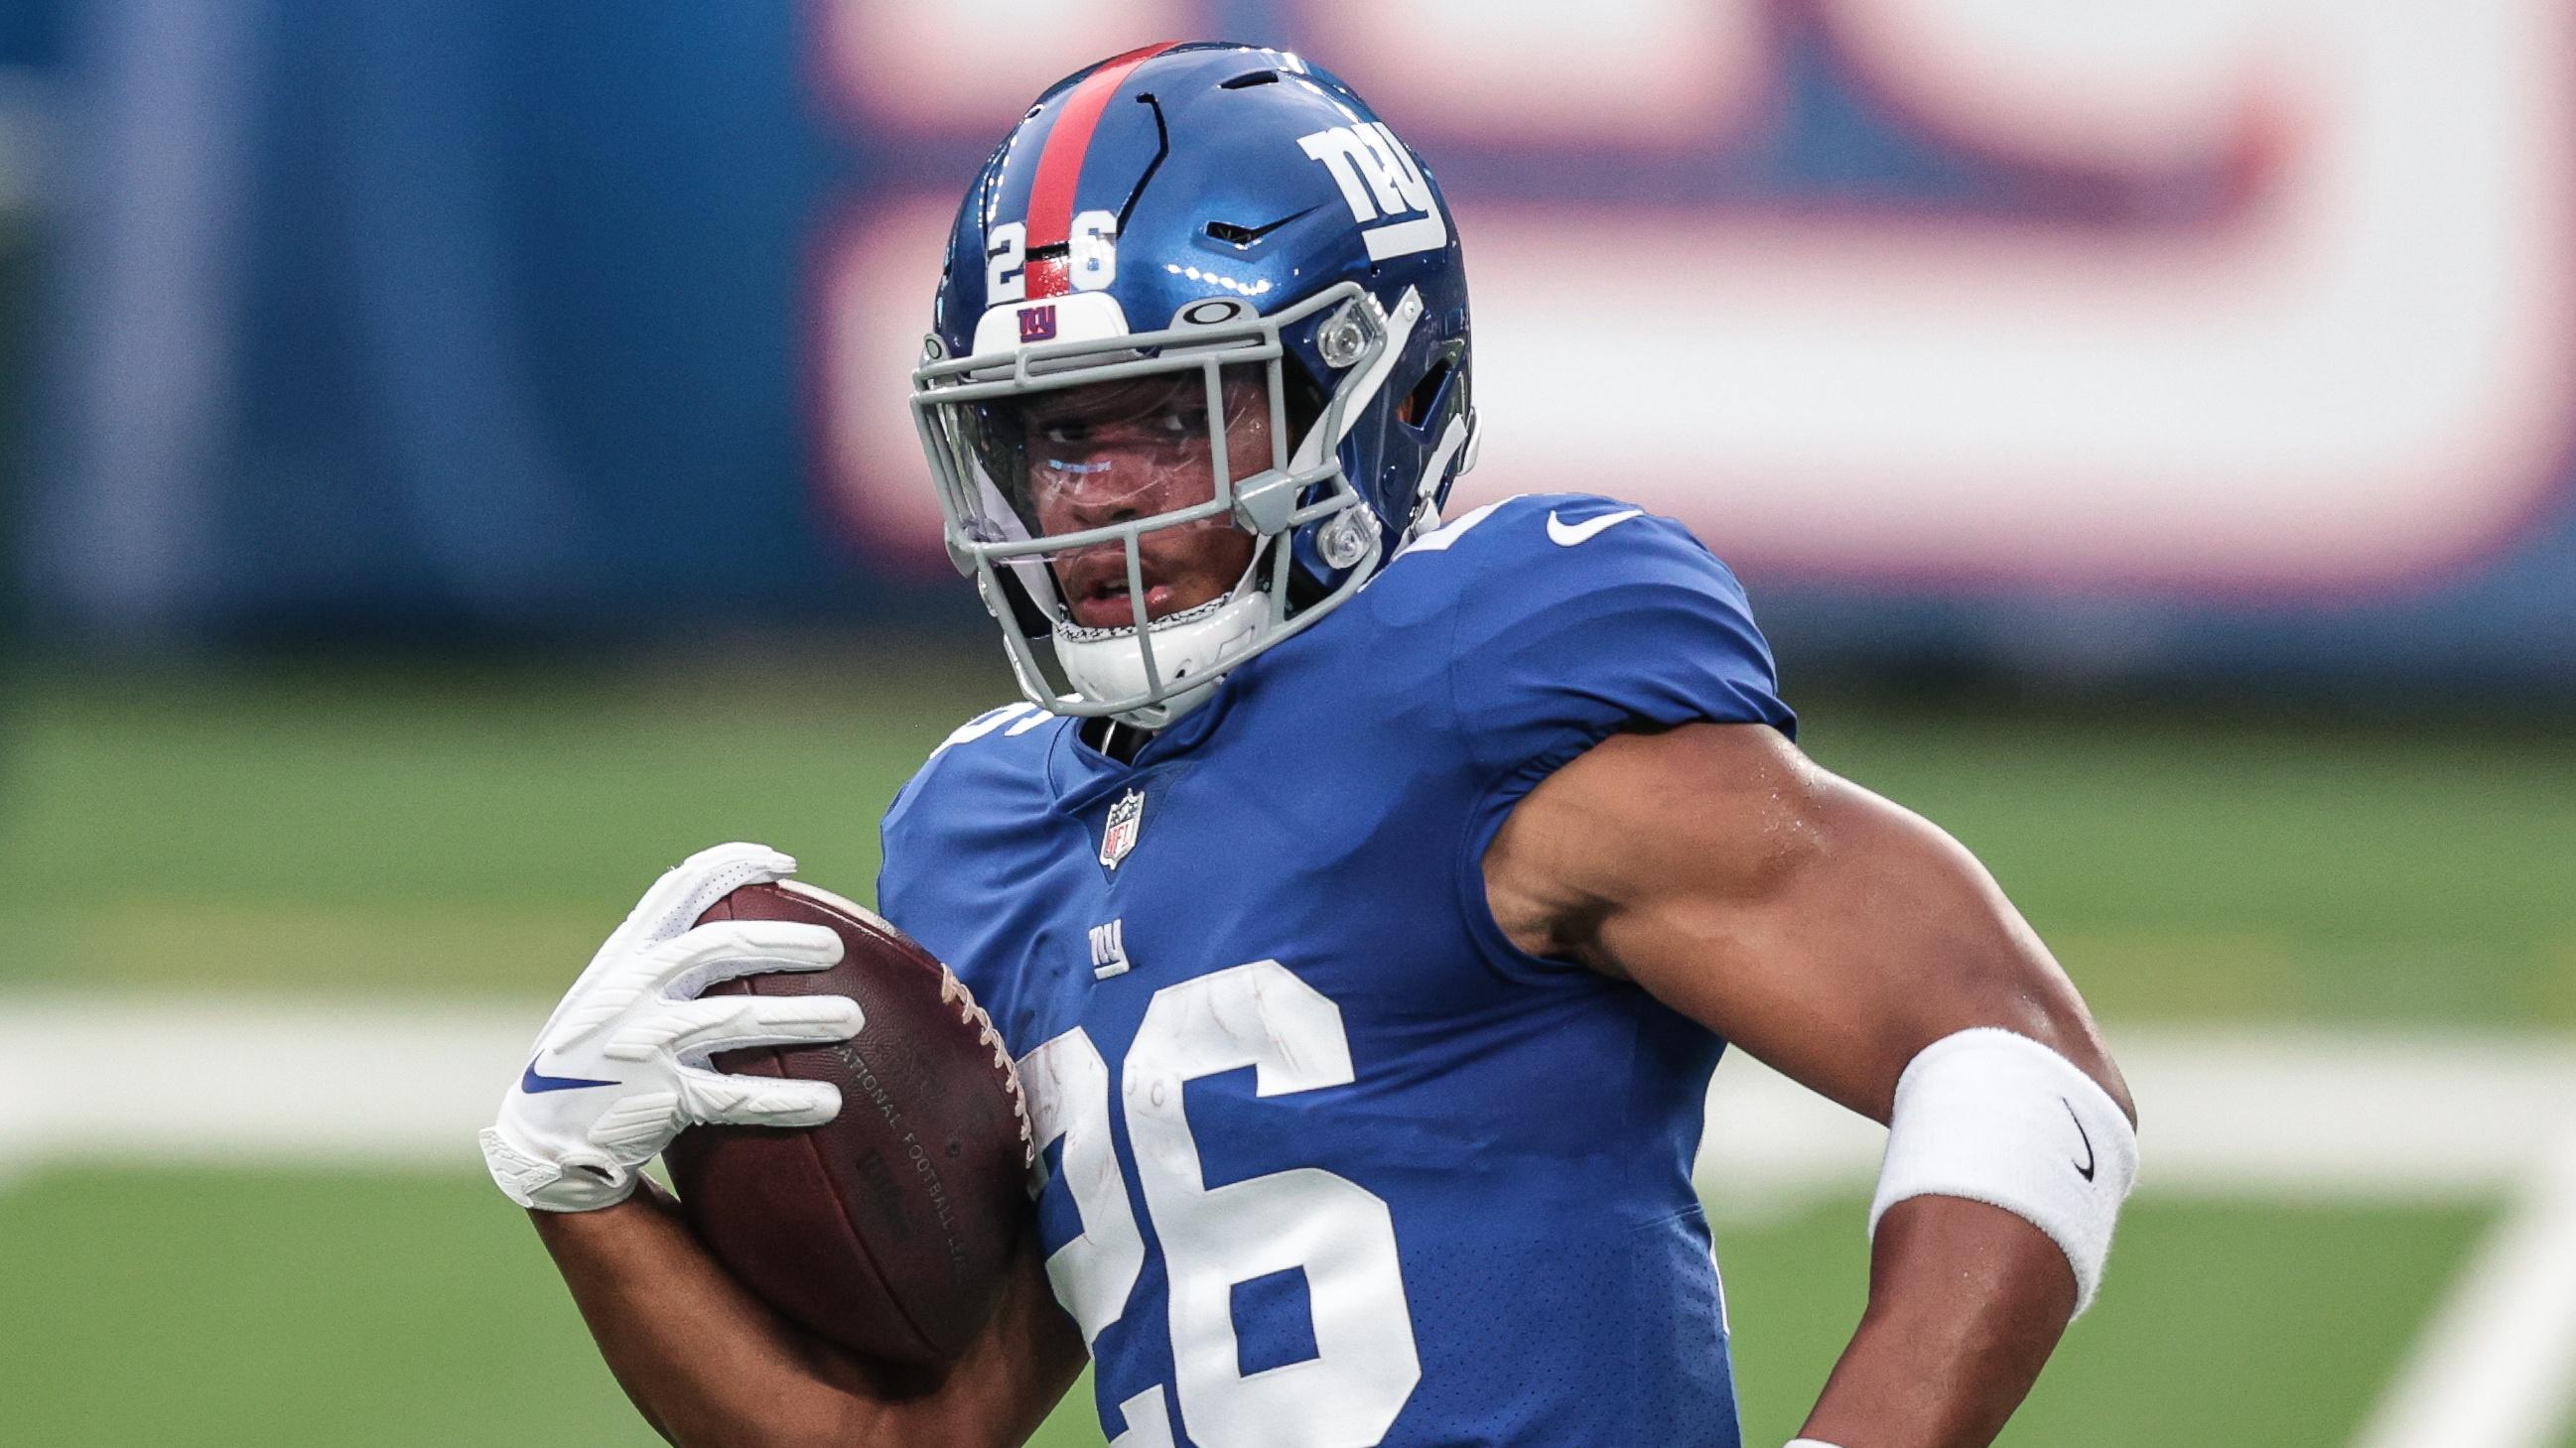 Aug 28, 2020; East Rutherford, New Jersey, USA; New York Giants running back Saquon Barkley (26) runs with the ball before the Blue-White Scrimmage at MetLife Stadium. Mandatory Credit: Vincent Carchietta-USA TODAY Sports / © Vincent Carchietta-USA TODAY Sports